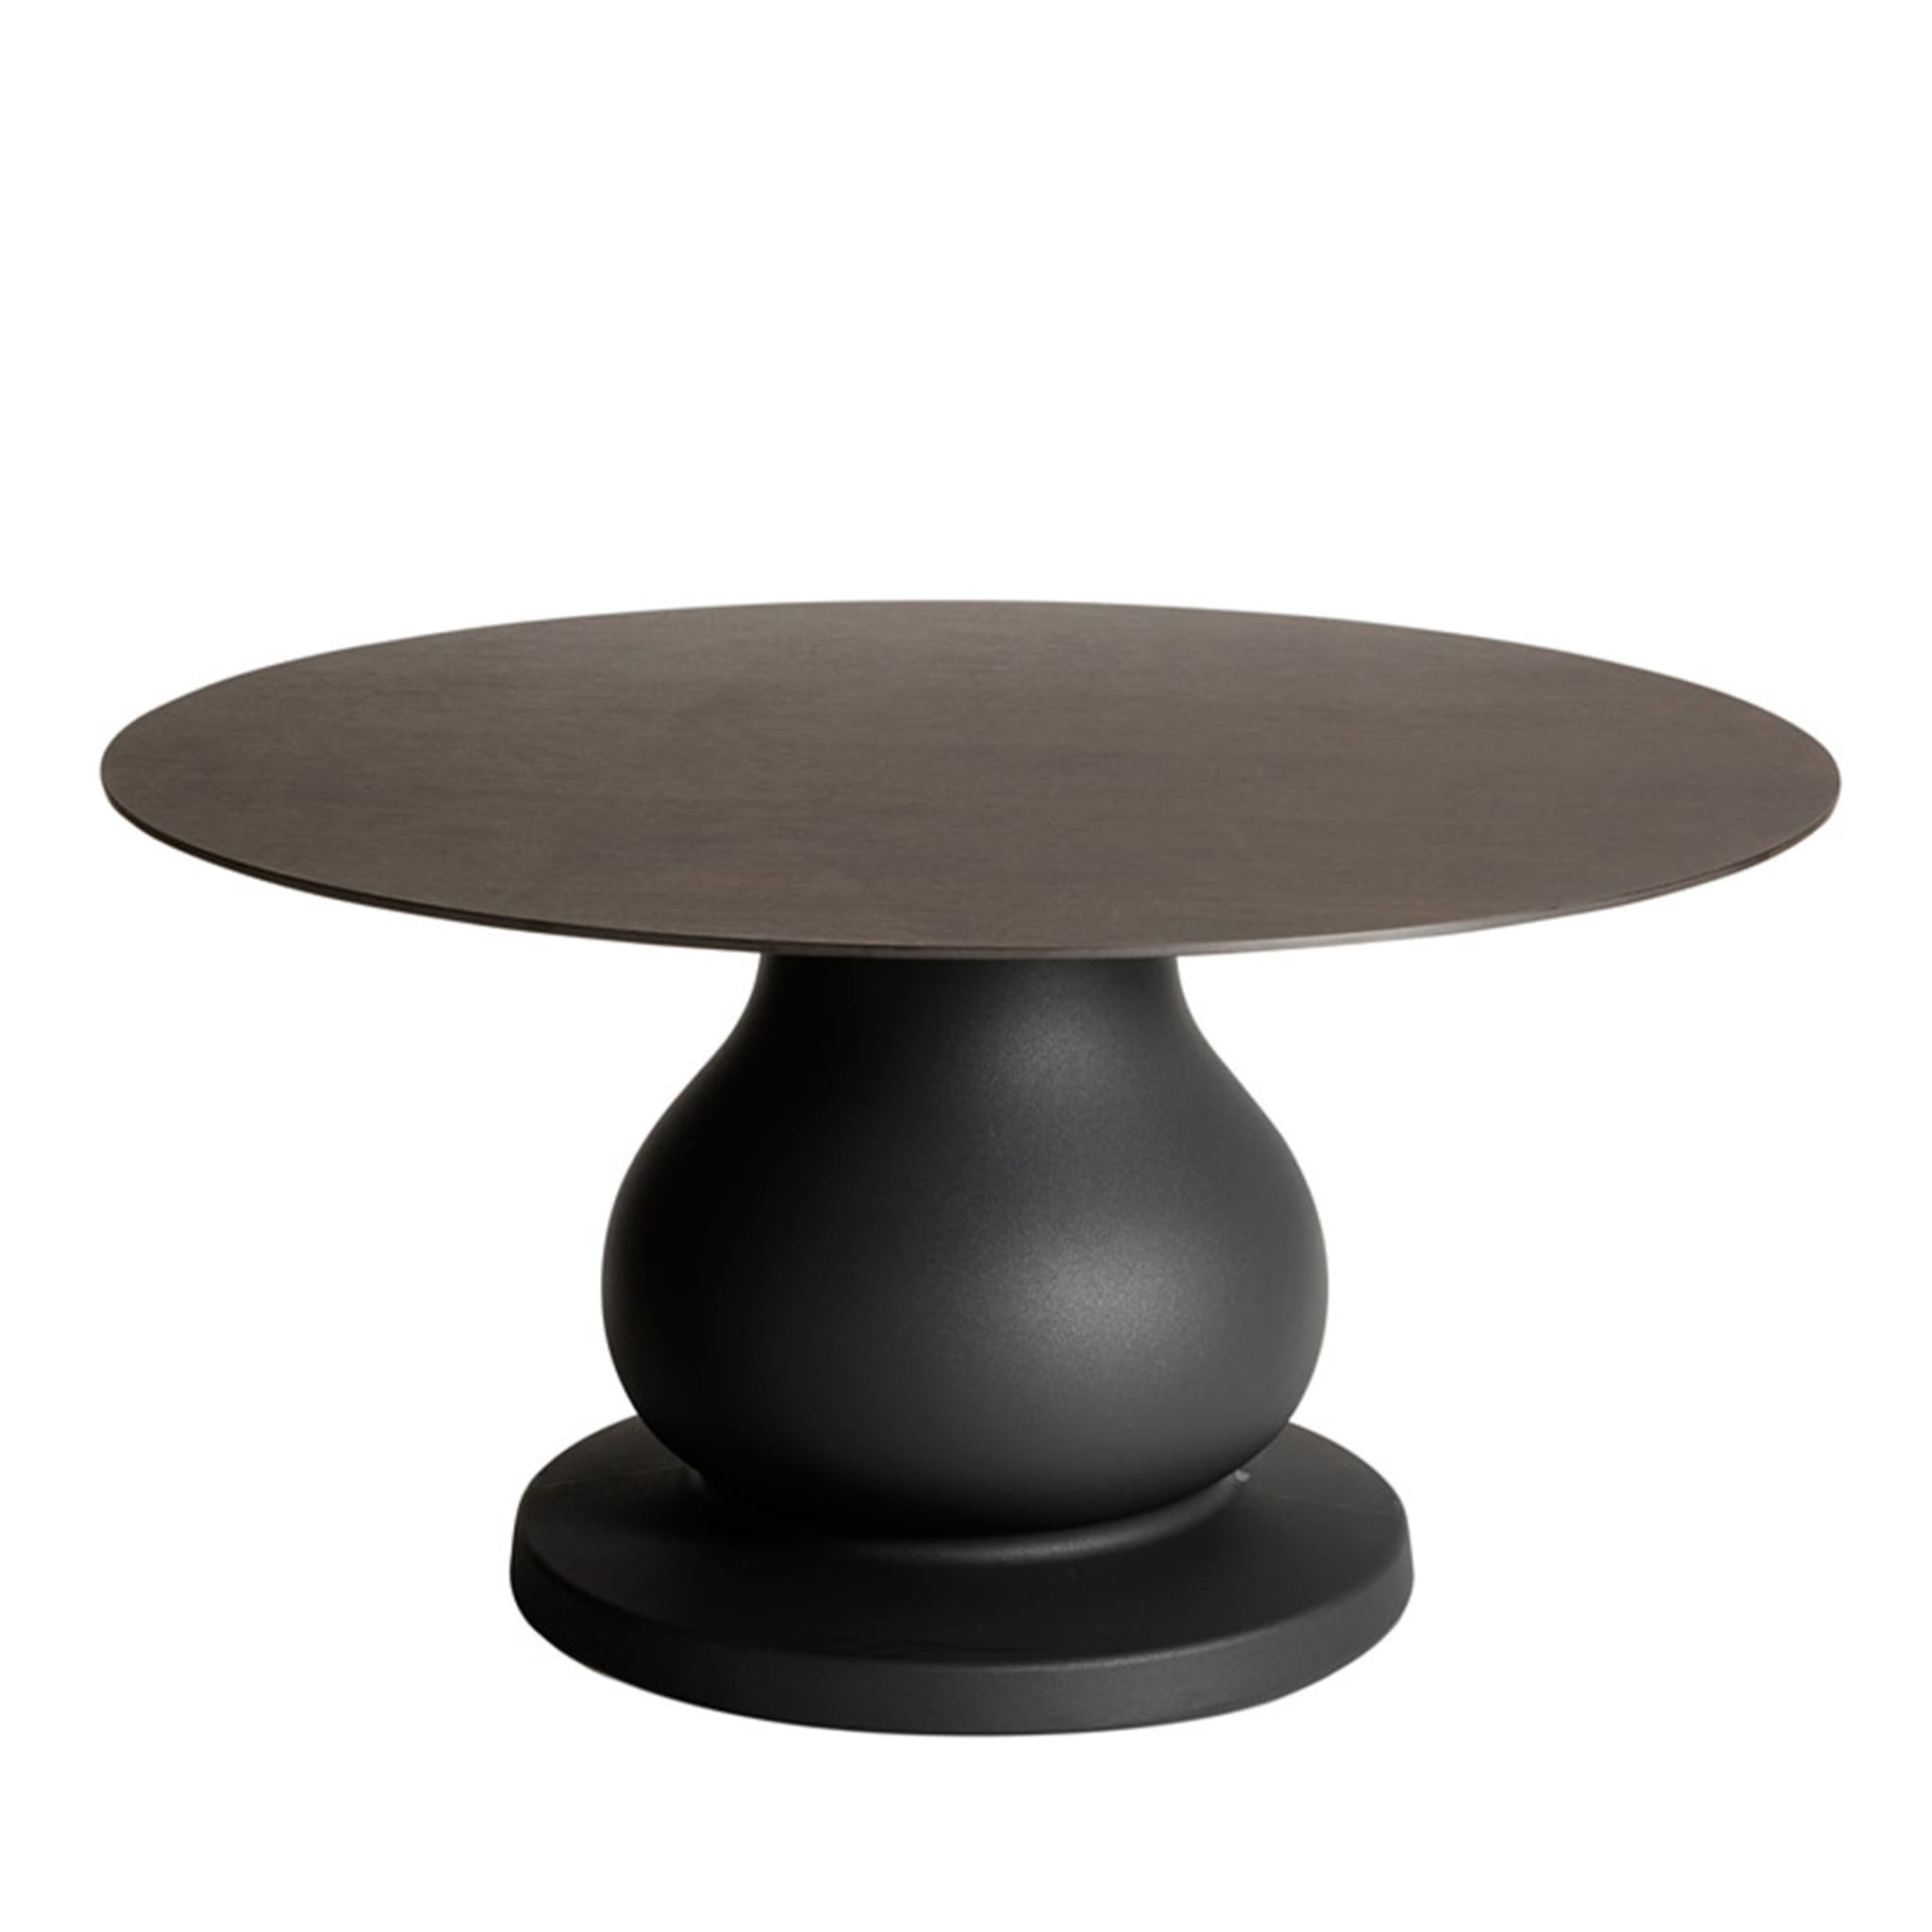 Ottocento Black and Wenge Large Table by Paola Navone - Main view